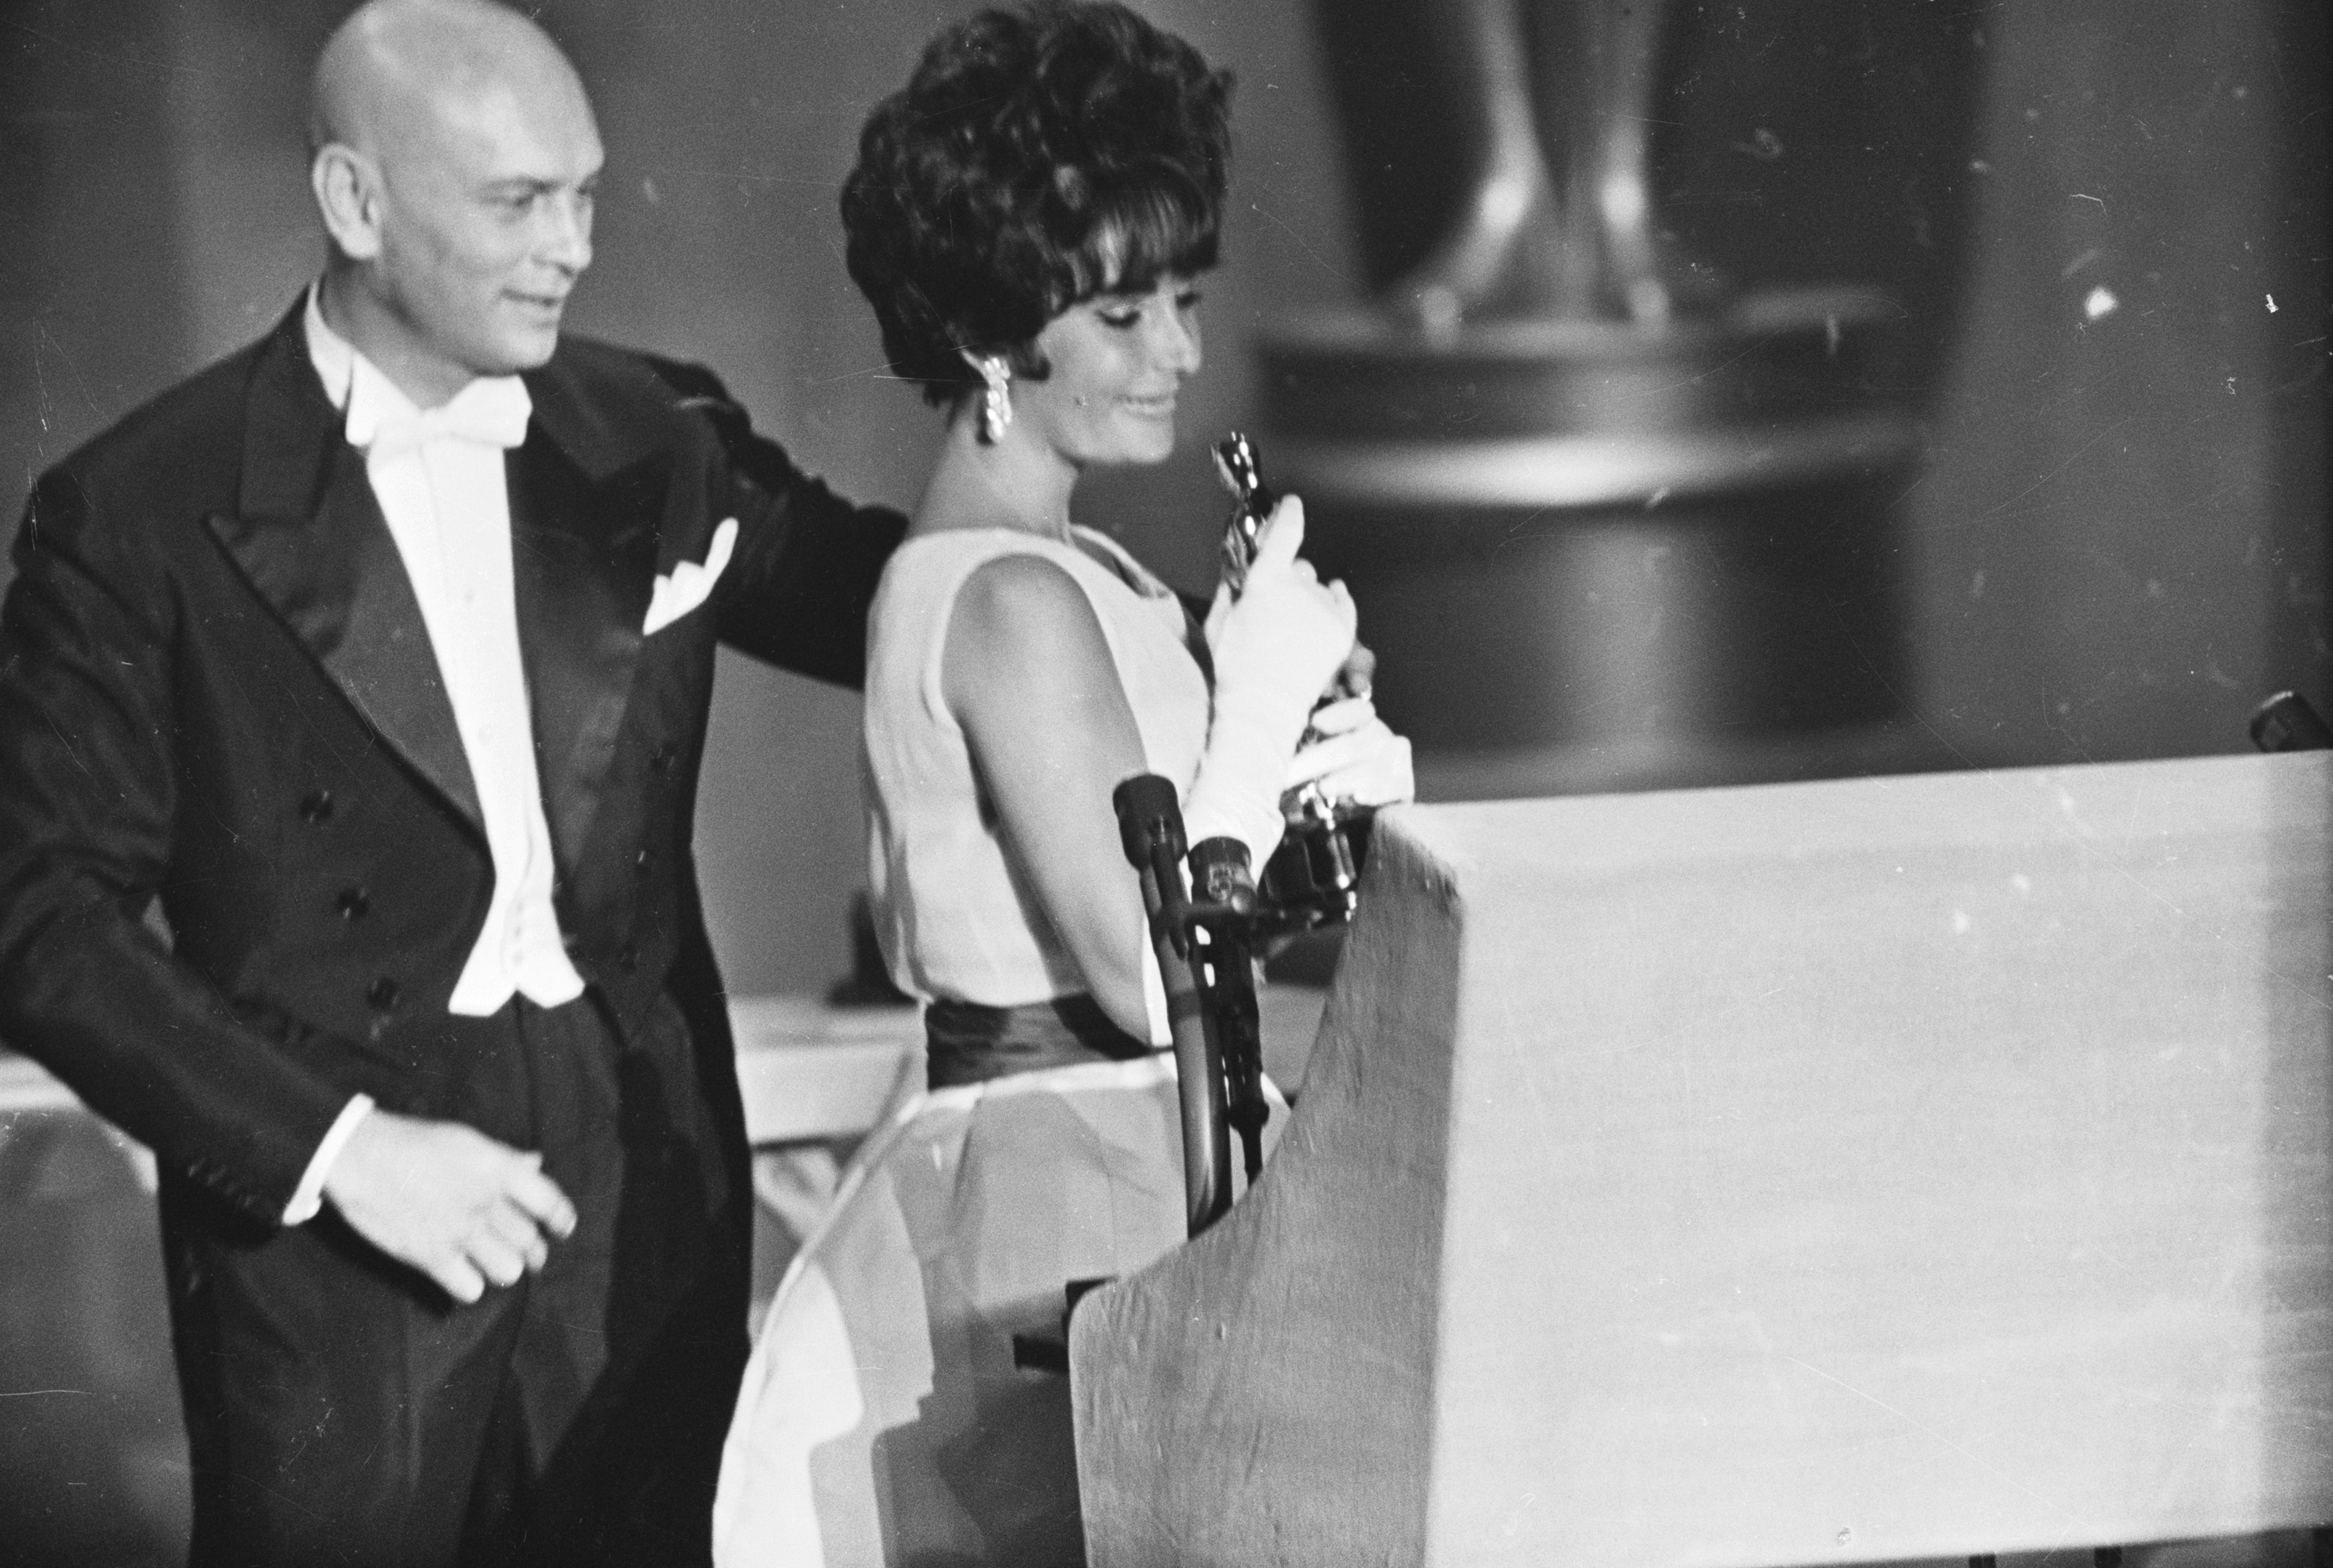 Academy Awards 2021: The most memorable Oscars moments of all time - NZ  Herald